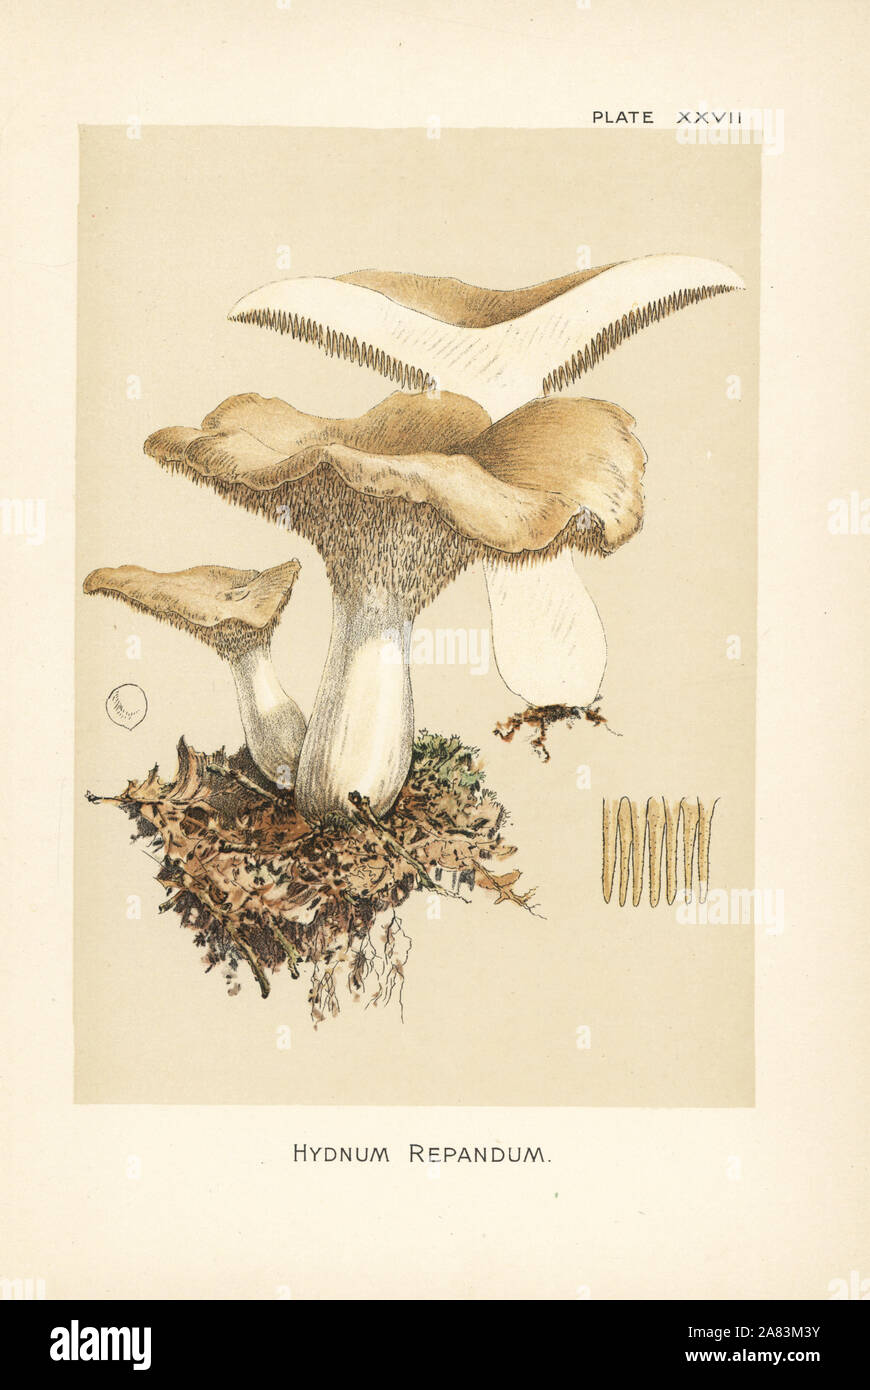 Sweet tooth, wood hedgehog or hedgehog mushroom, Hydnum repandum. Chromolithograph after a botanical illustration by William Hamilton Gibson from his book Our Edible Toadstools and Mushrooms, Harper, New York, 1895. Stock Photo